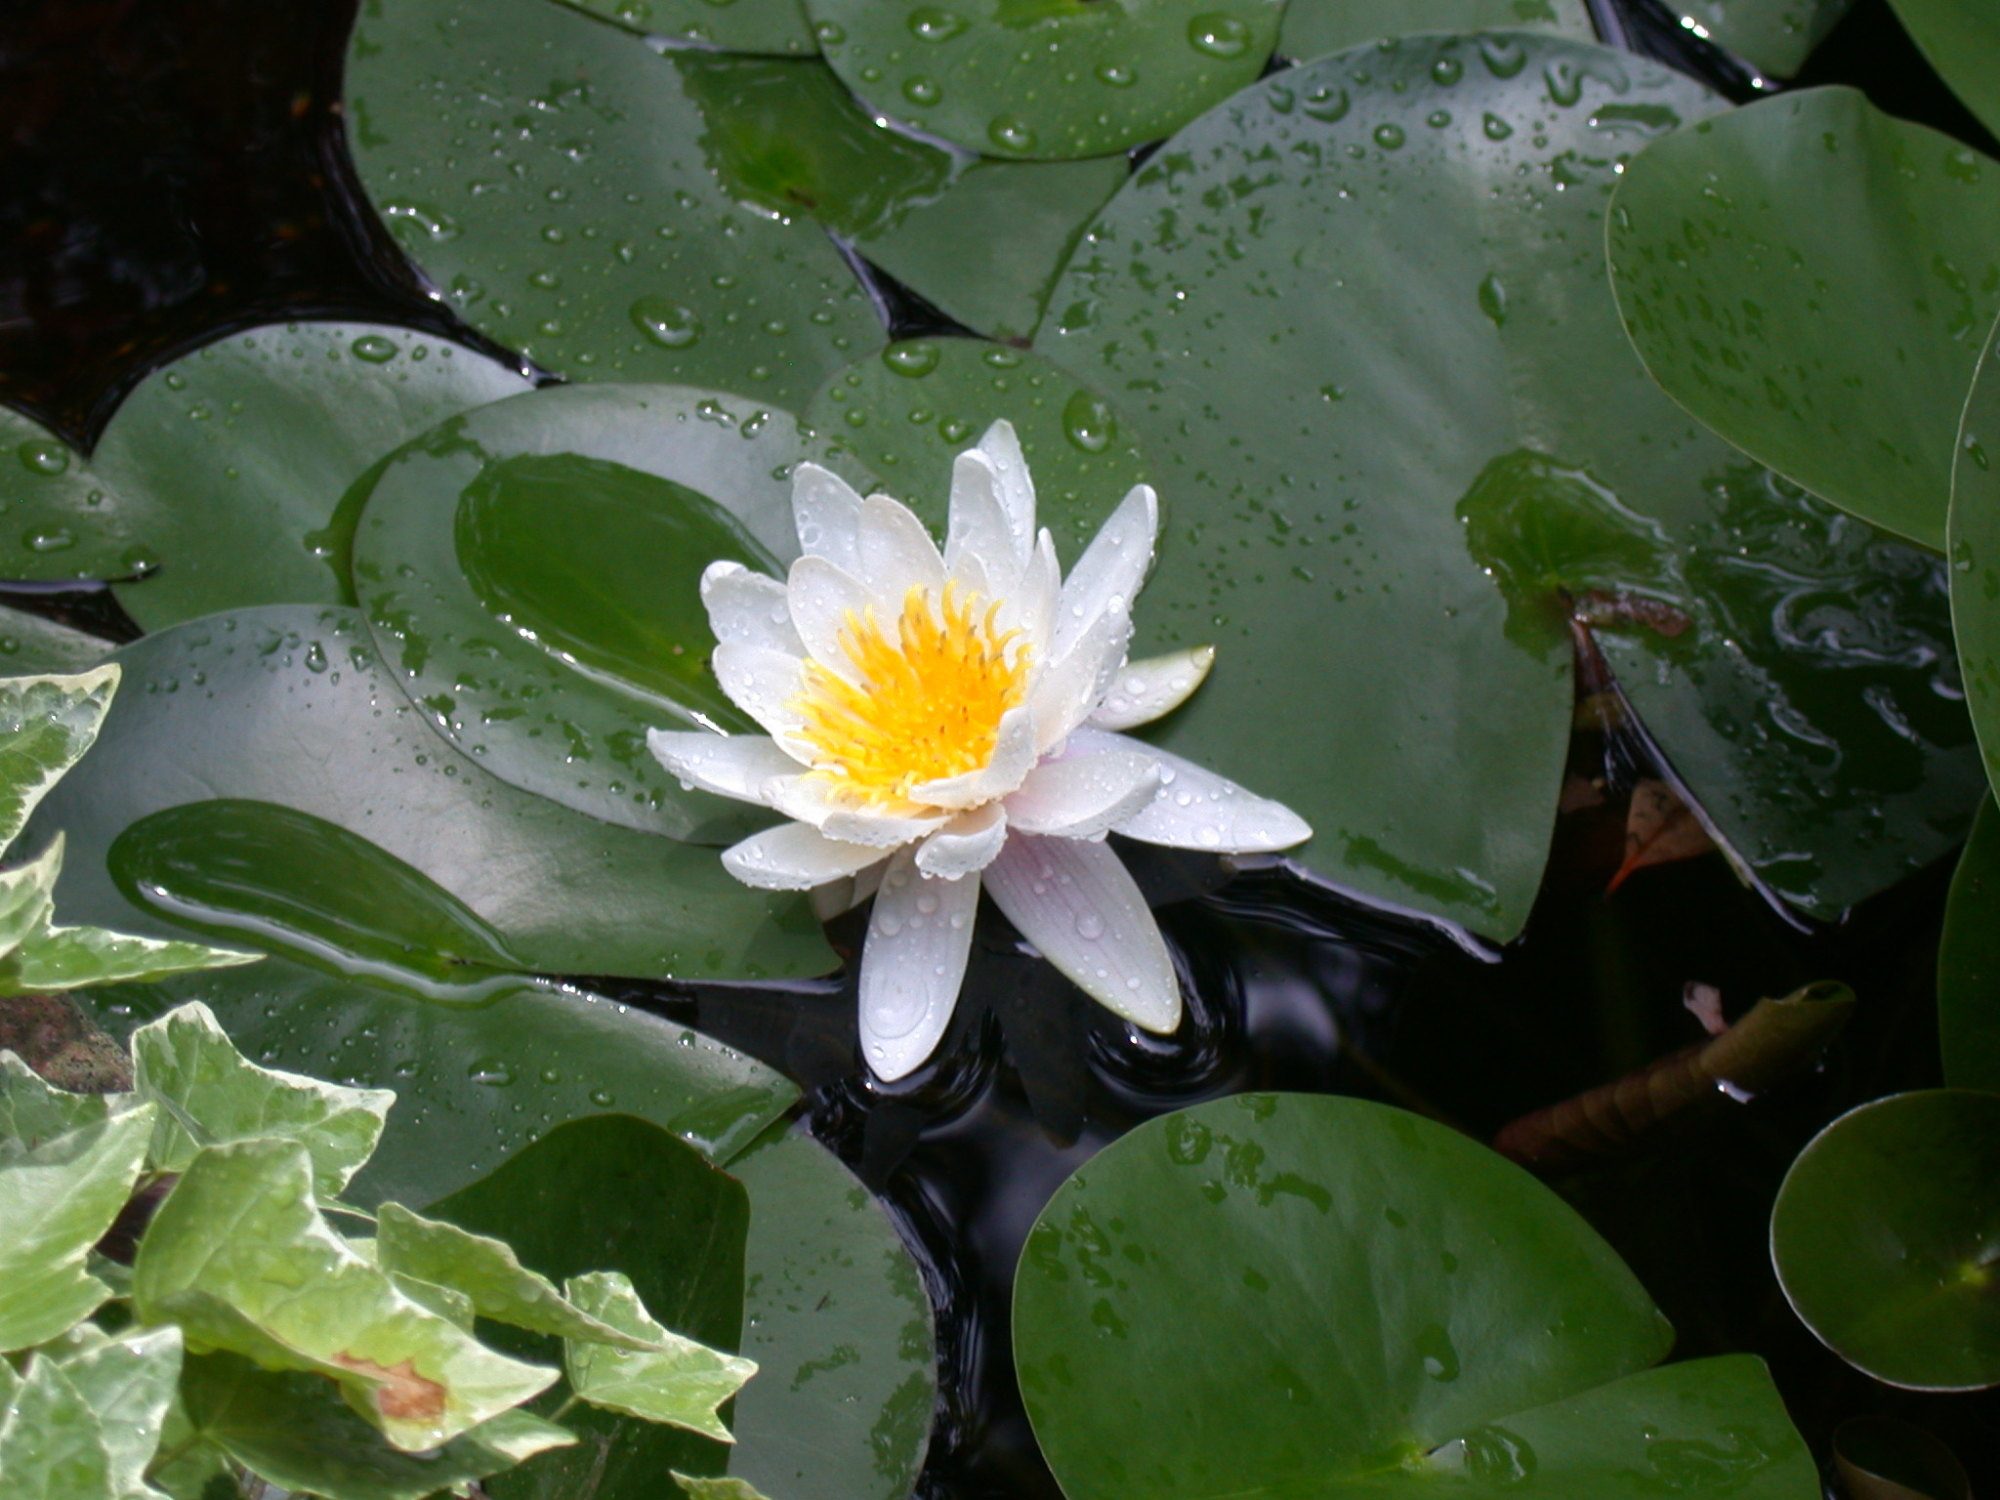 My pond lily in bloom 2014